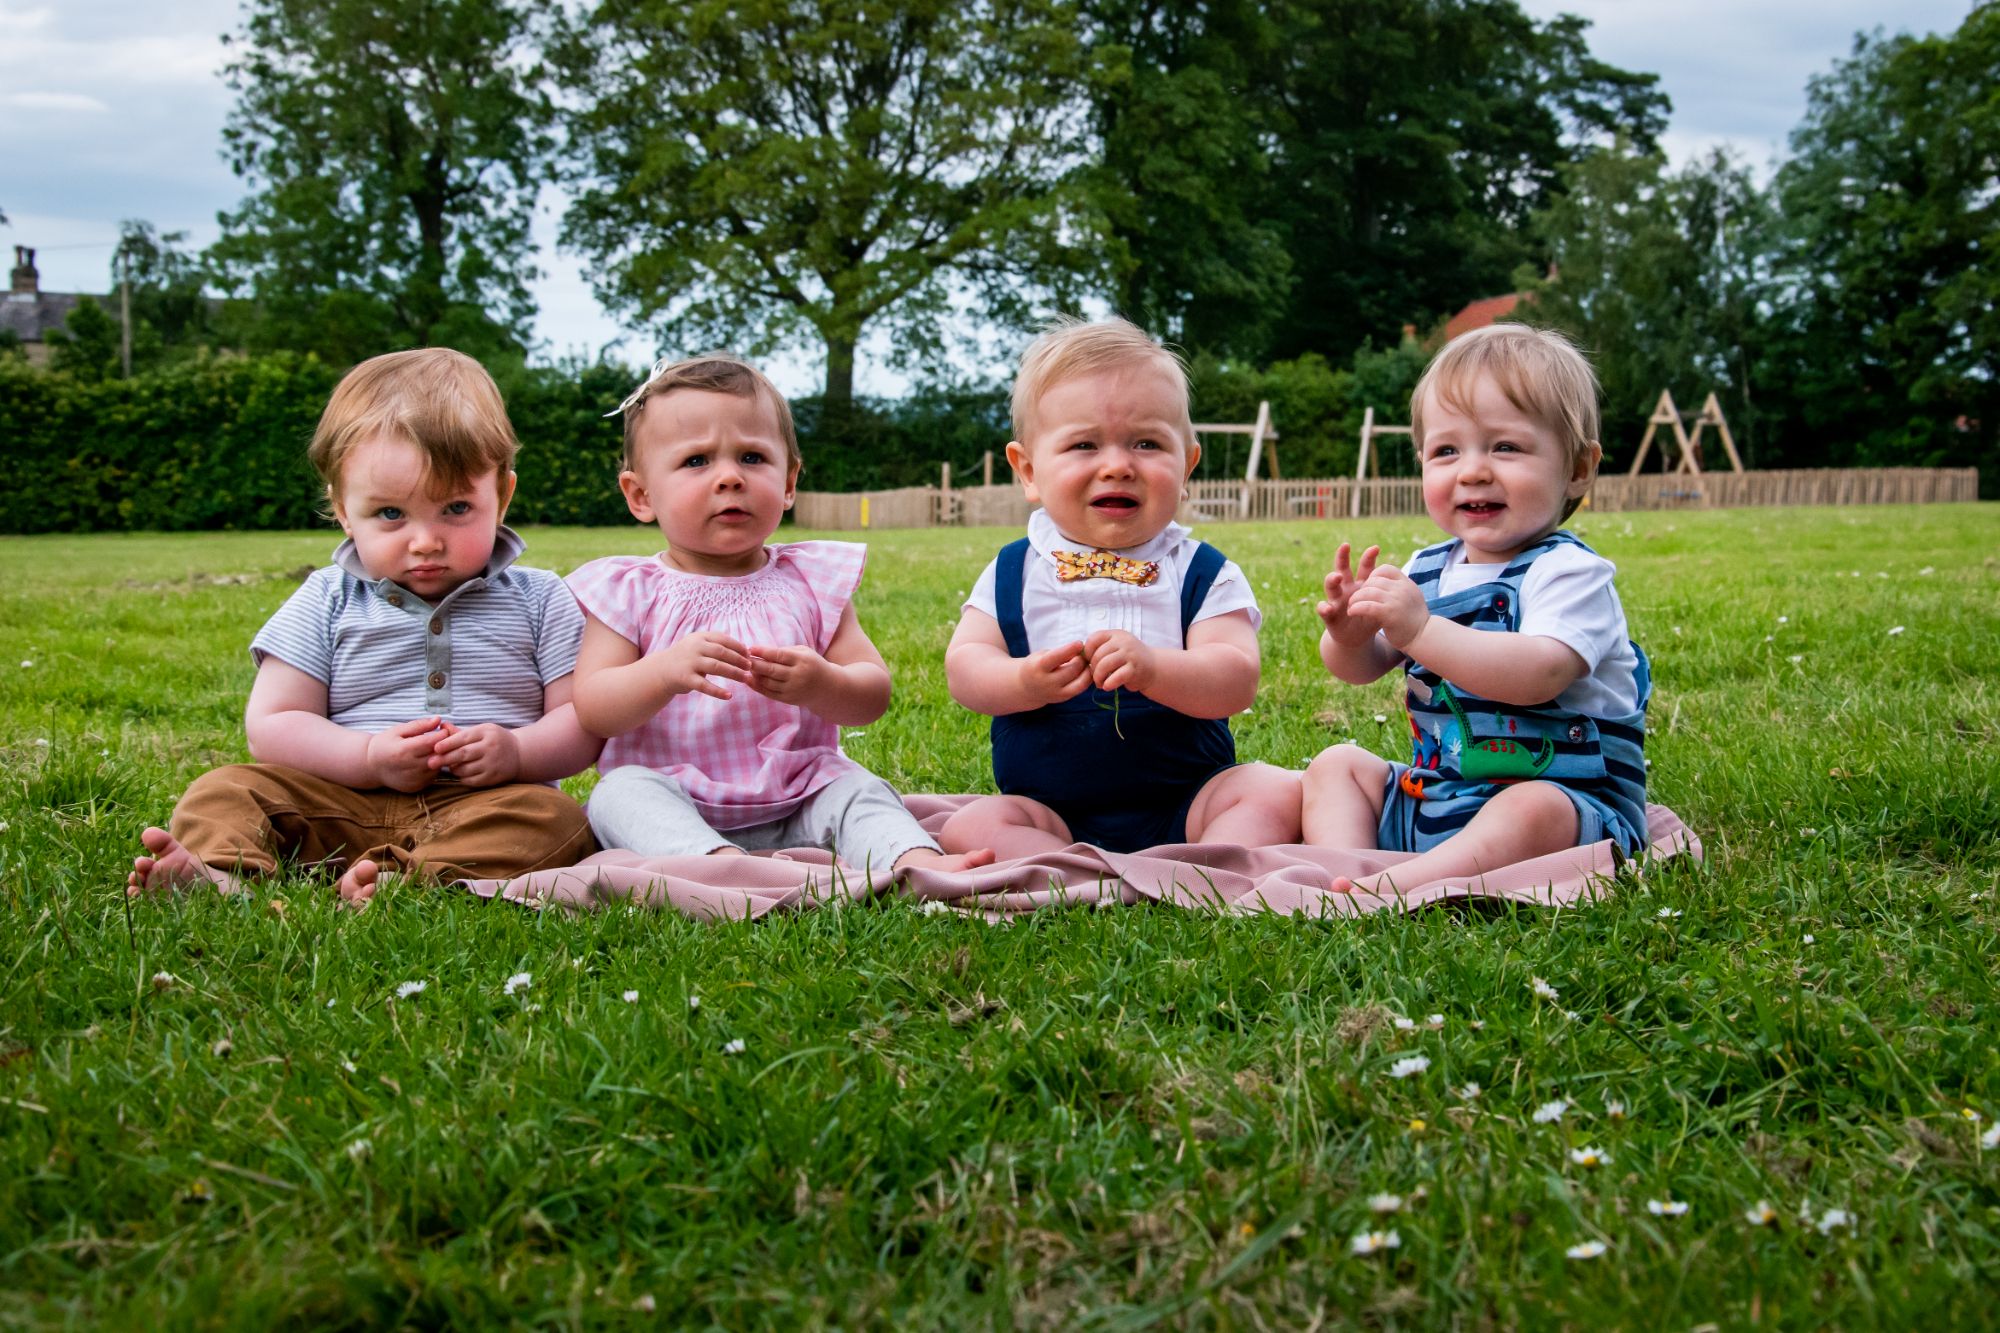 A little boy is joined by his one year old friends as the four of htem sit in a line outdoors at his first birthday party.